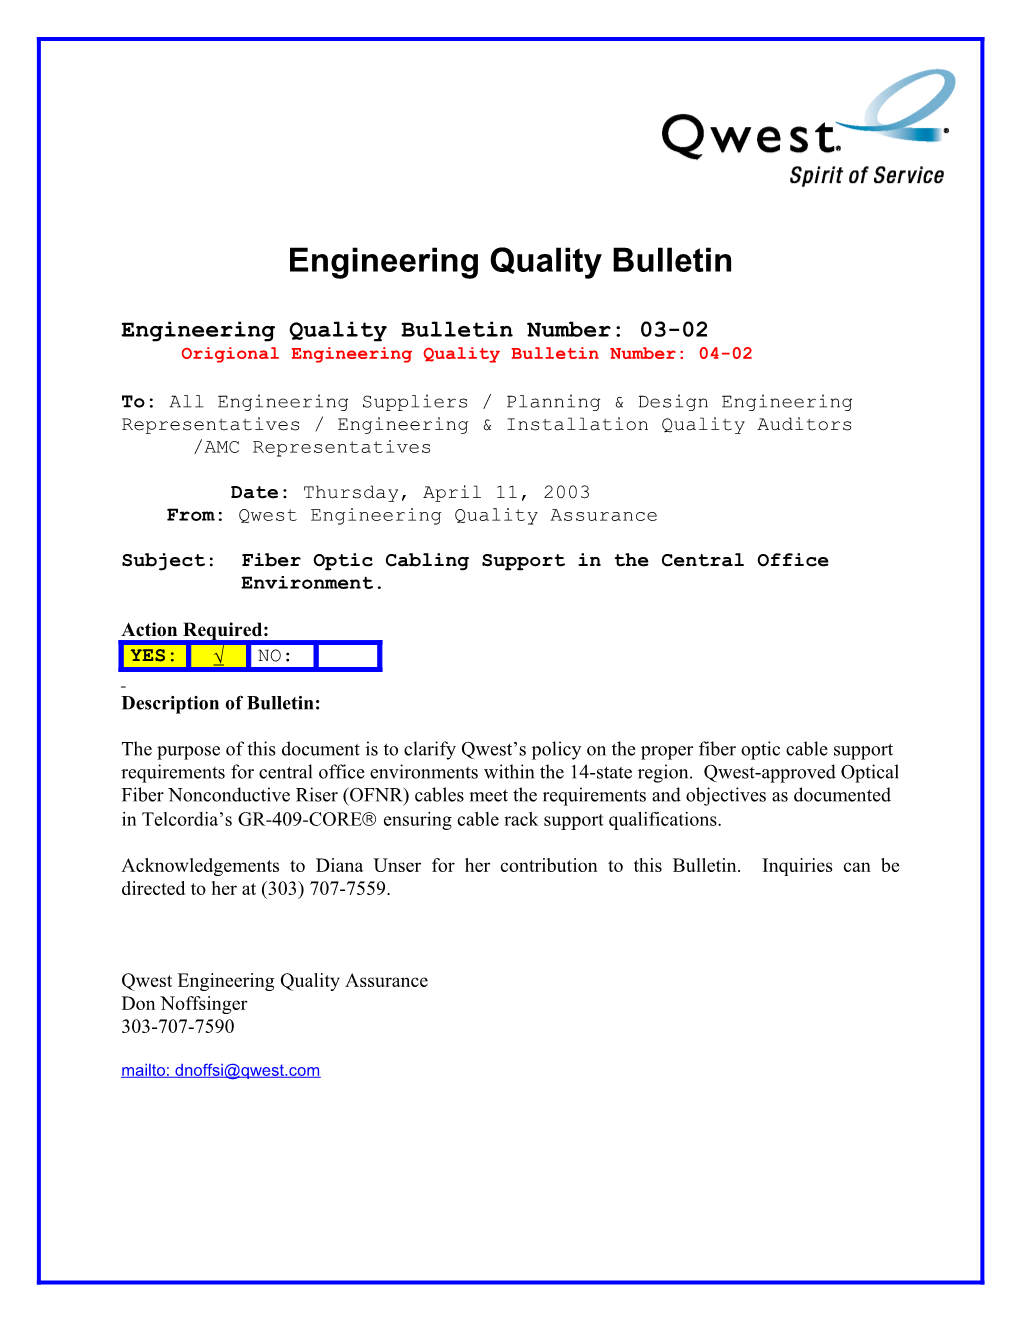 Engineering Quality Bulletin Number: 03-02